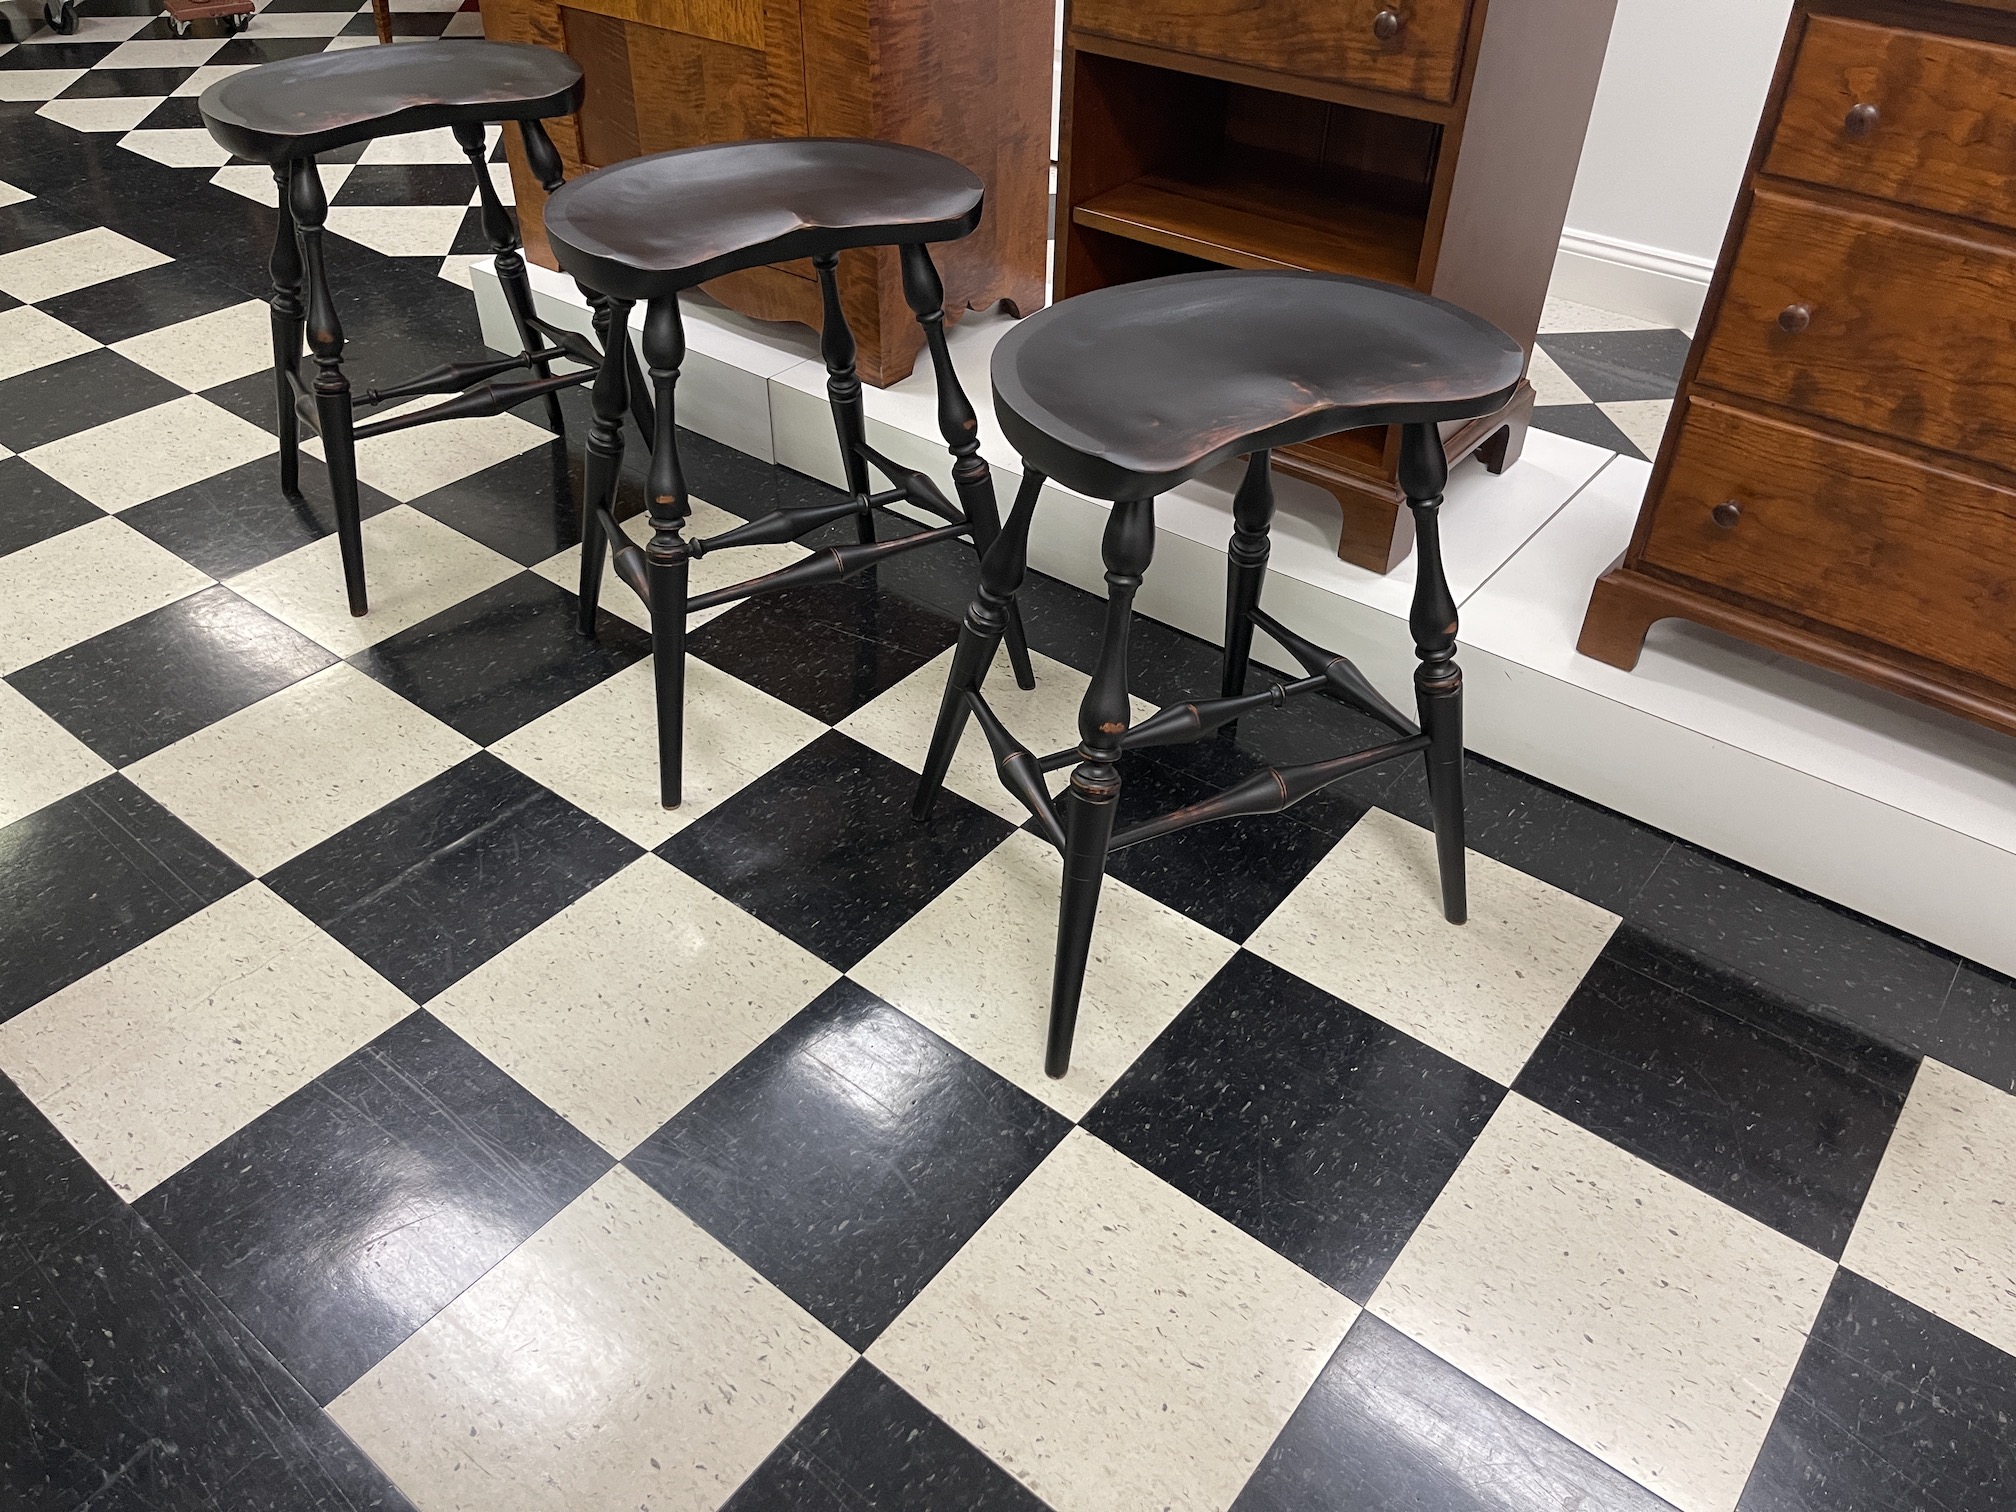 Set of 3 Historical Saddle Seat Kitchen Stools - 25in Counter Height Image